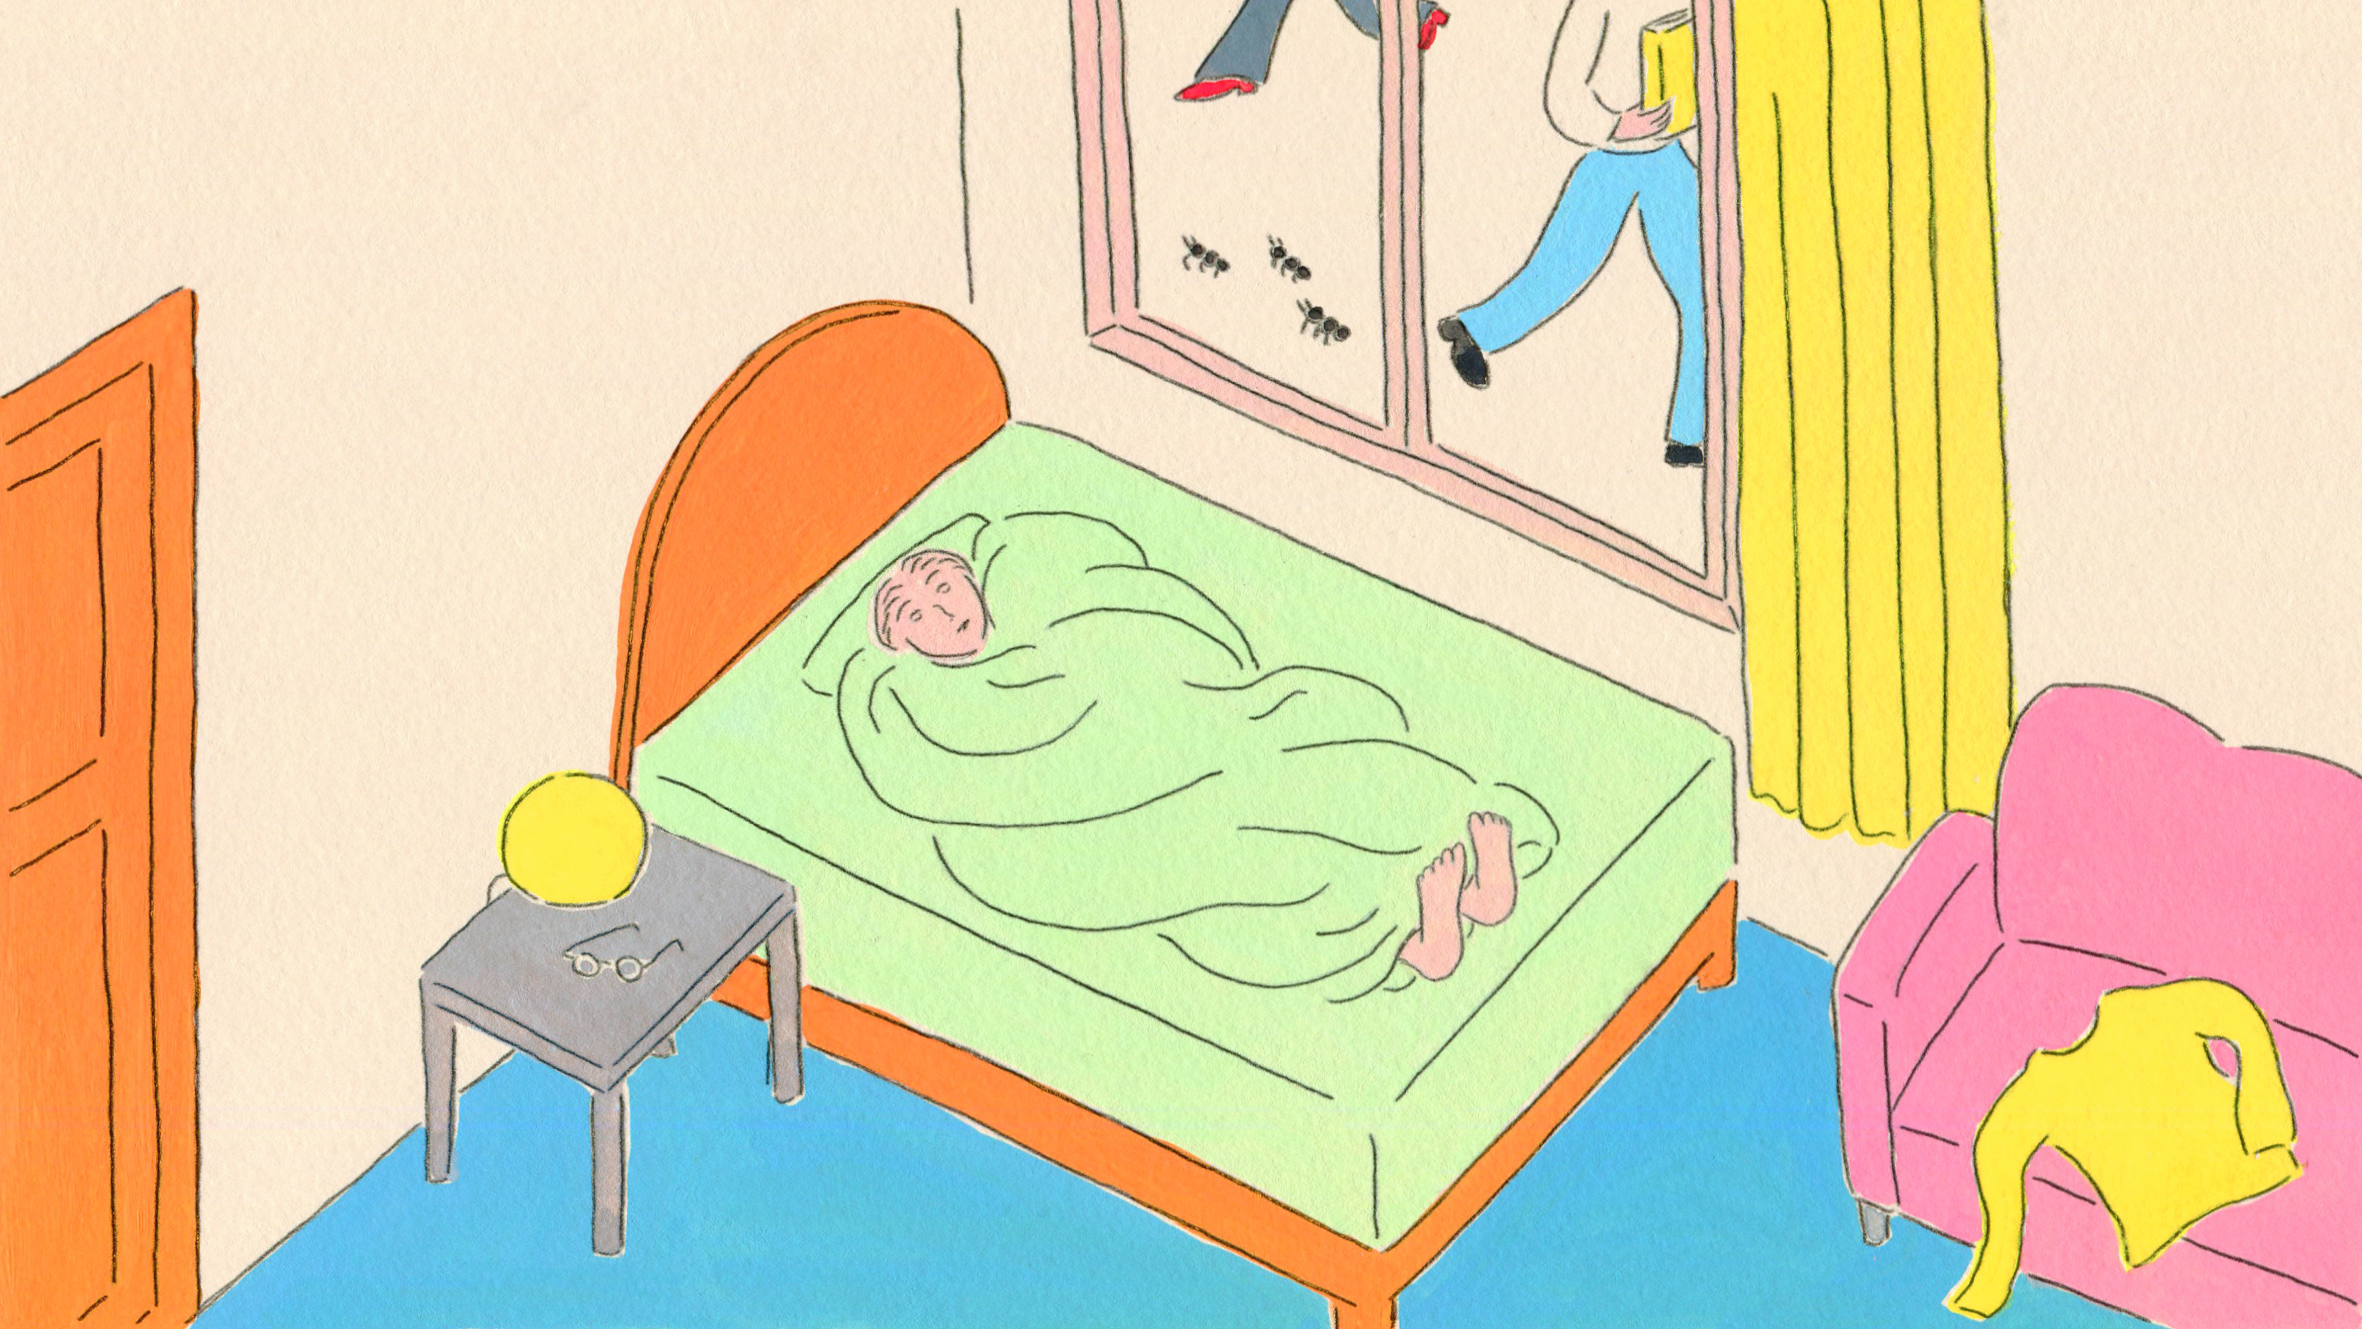 An illustration showing a person in bed, while others run on the street outside their window.